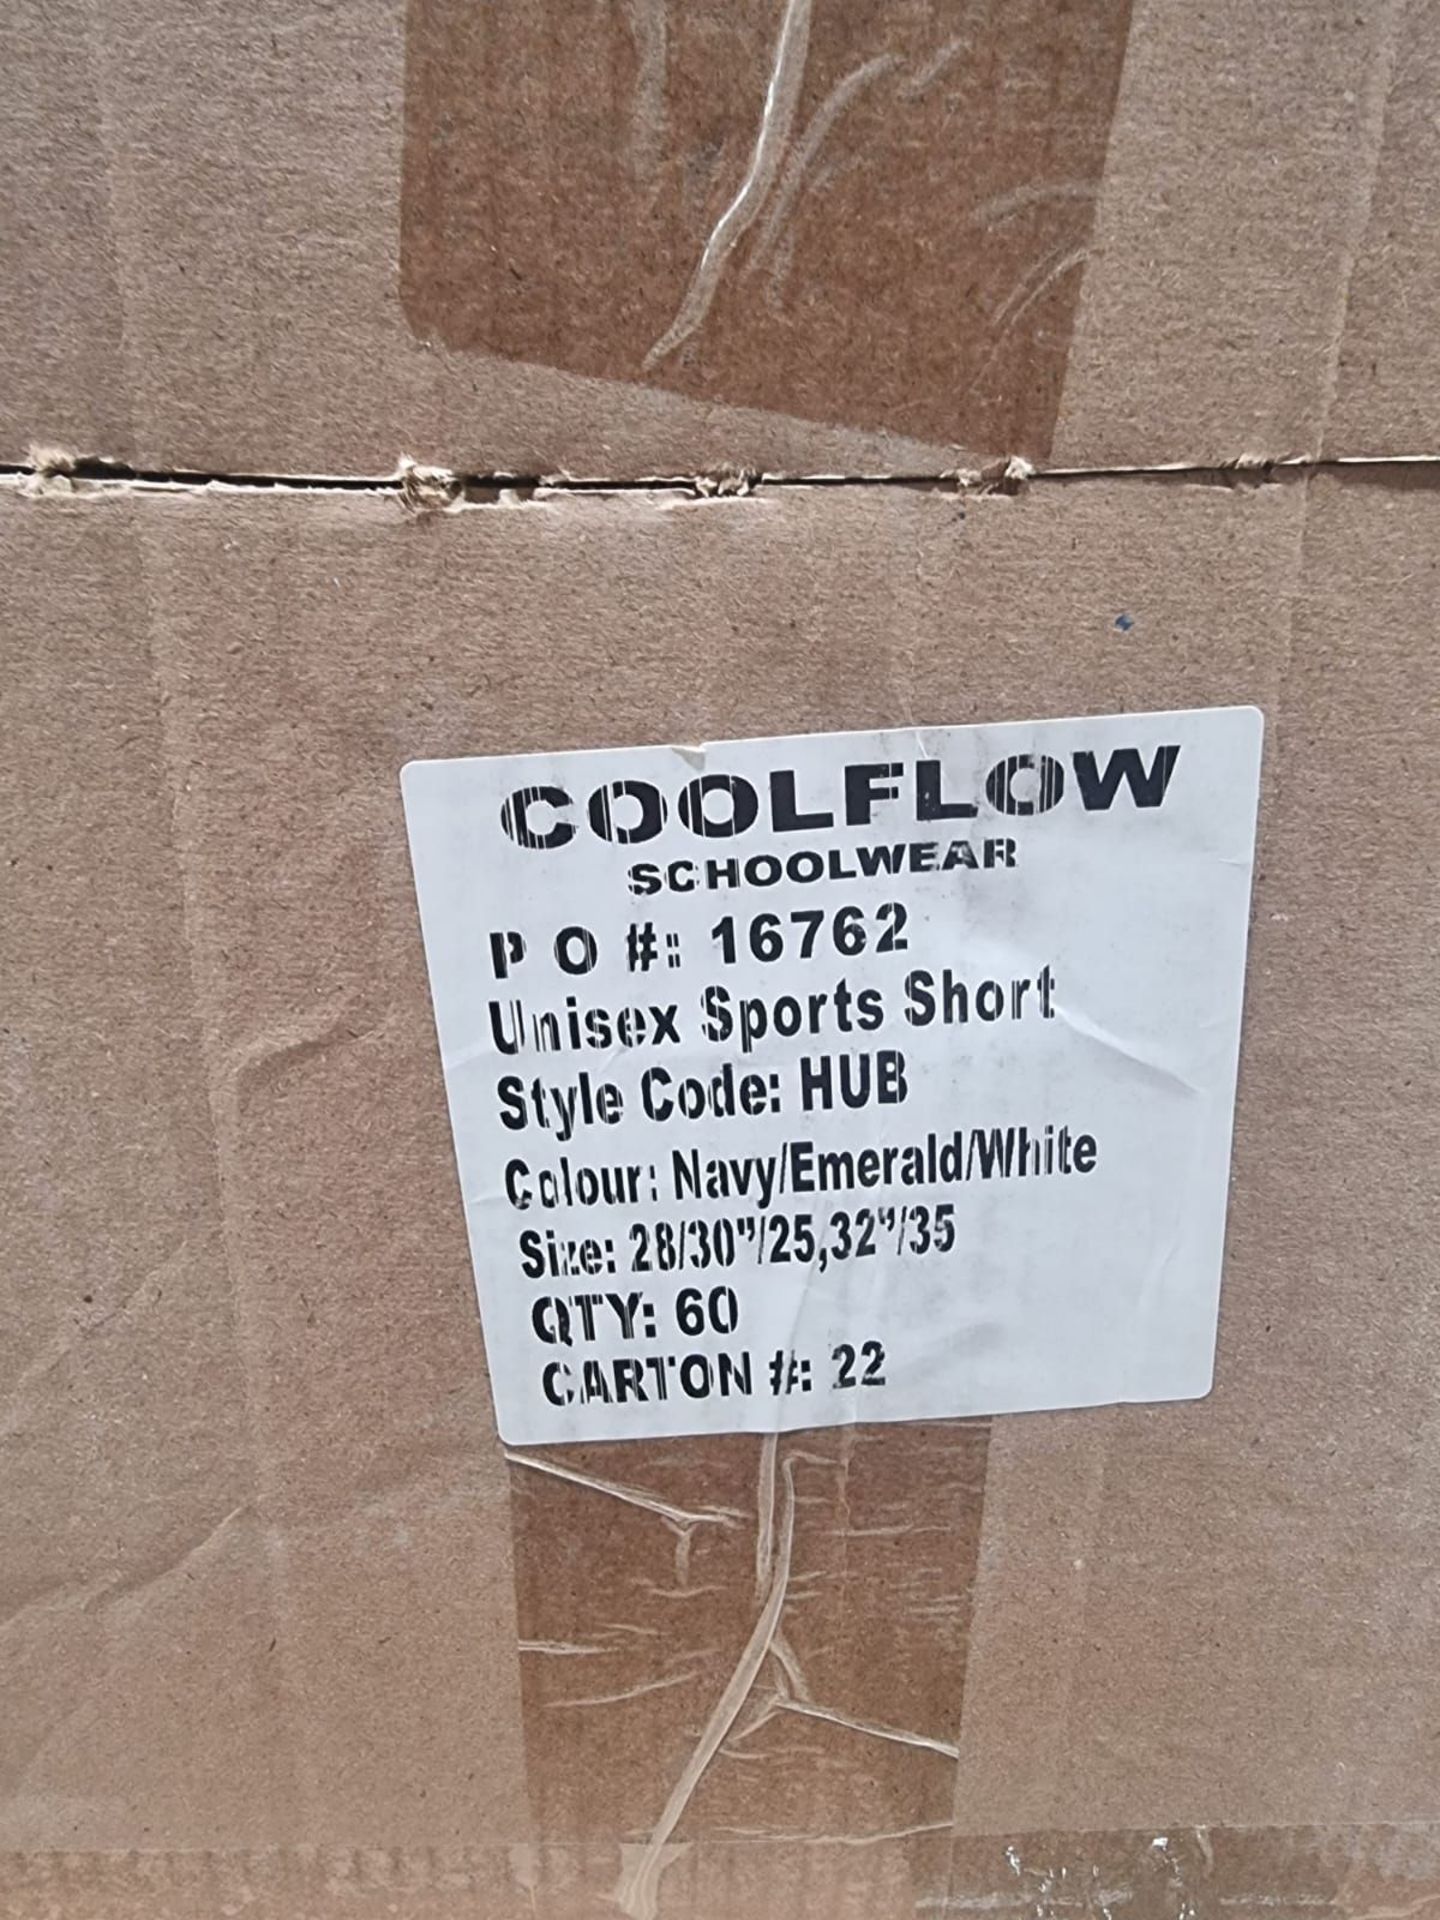 PALLET TO CONTAIN A LARGE QUANTITY OF NEW CLOTHING GOODS. MAY INCLUDE ITEMS SUCH AS: T-SHIRTS, - Image 19 of 28